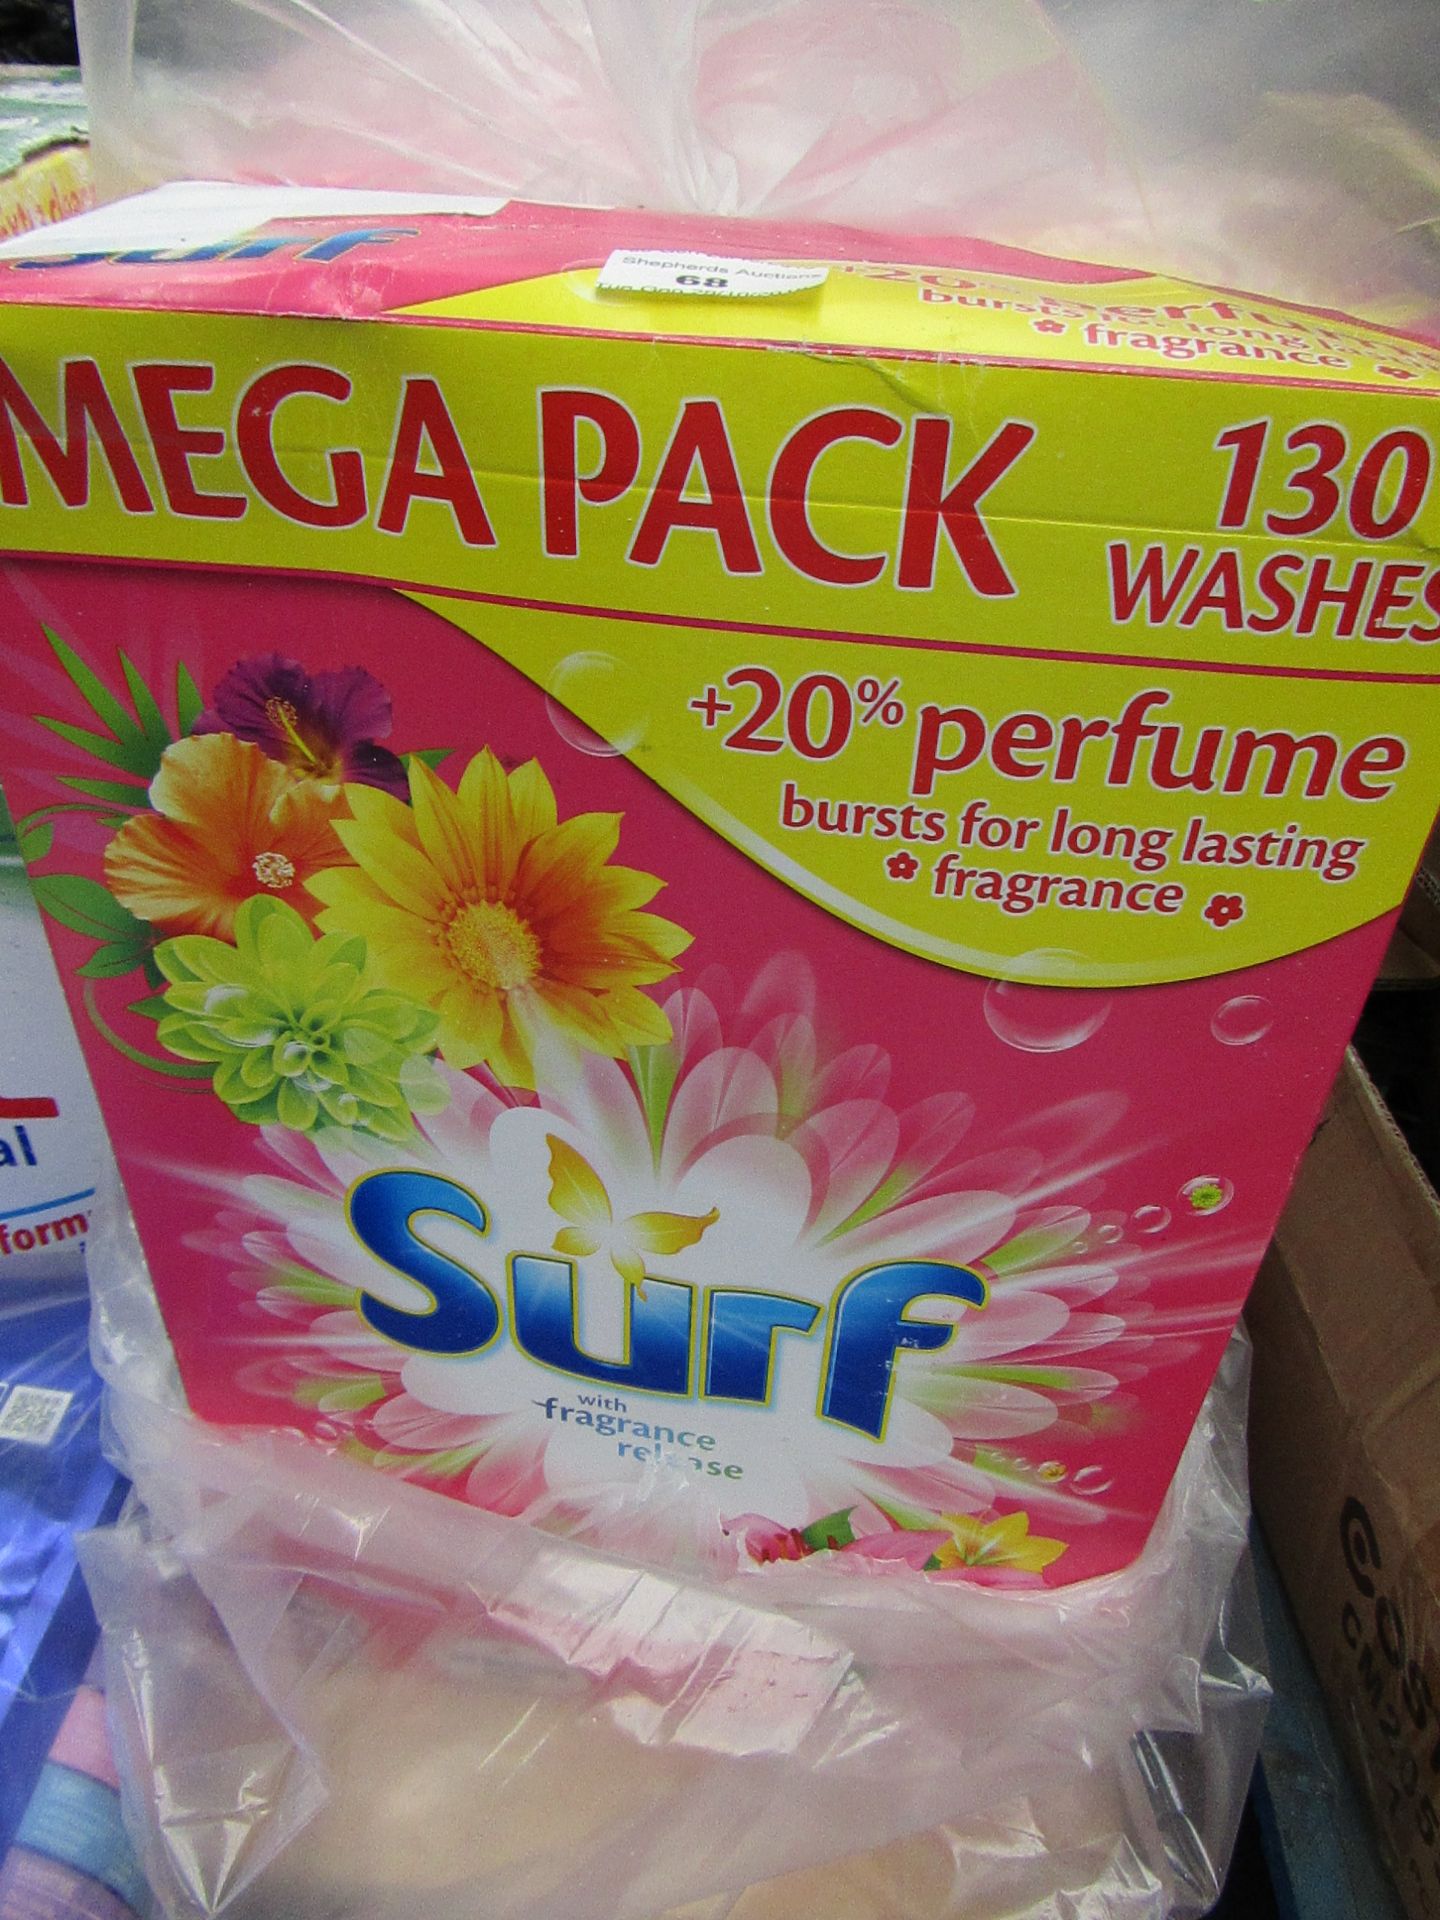 Surf Mega Pack with Fragrance Release 130 Washes Washing Powder